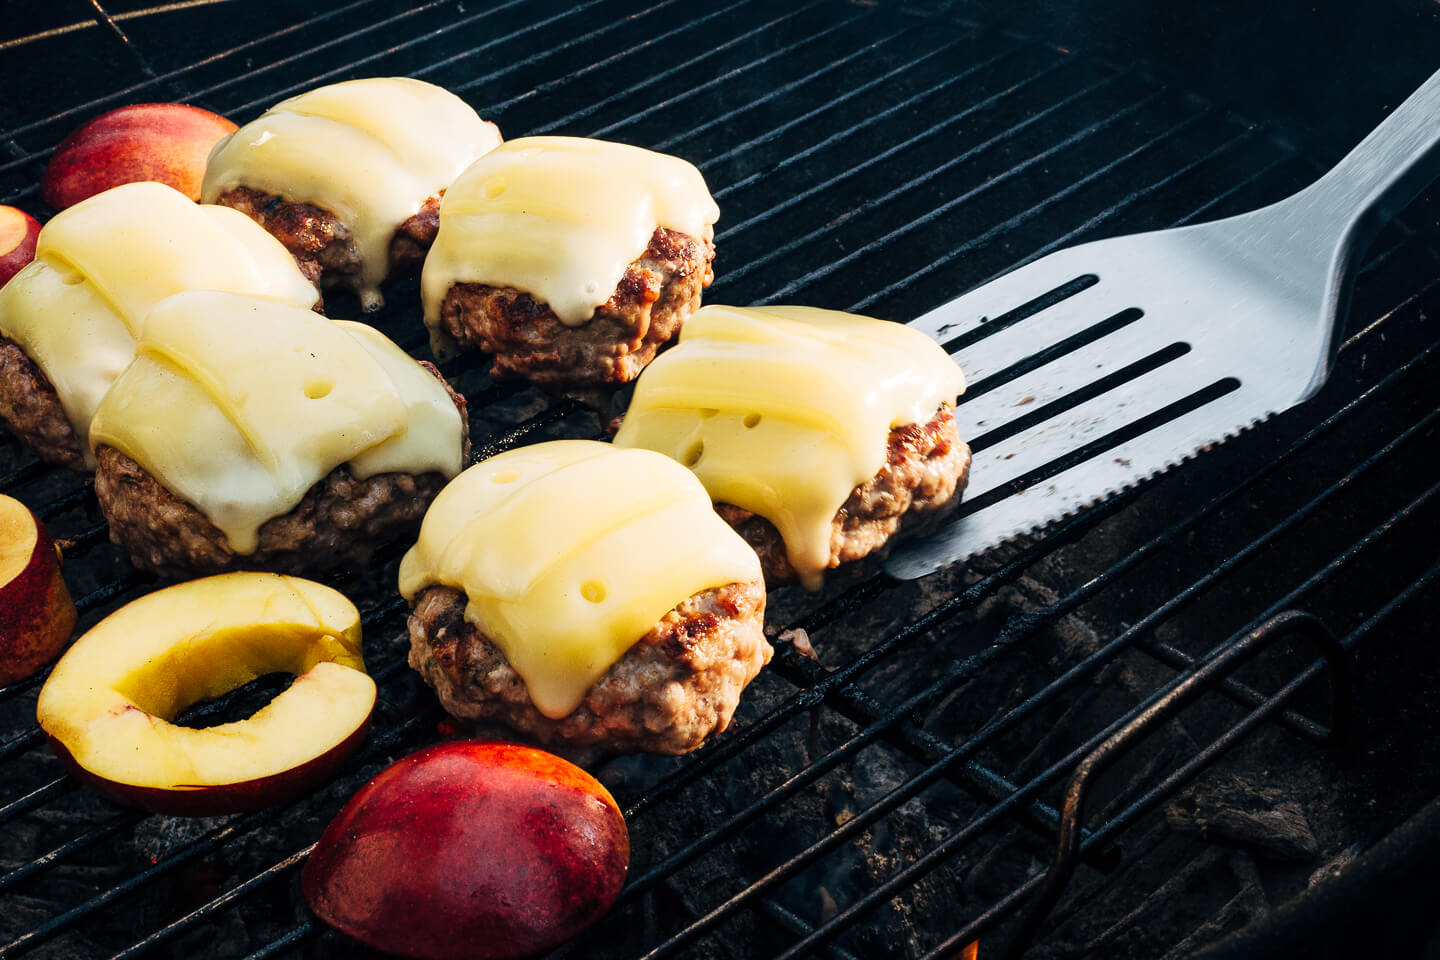 Juicy pork burgers perfectly grilled and topped with velvety melted Raclette cheese, grilled nectarine slices, crisp pickled red onions, and a smear of mayo.